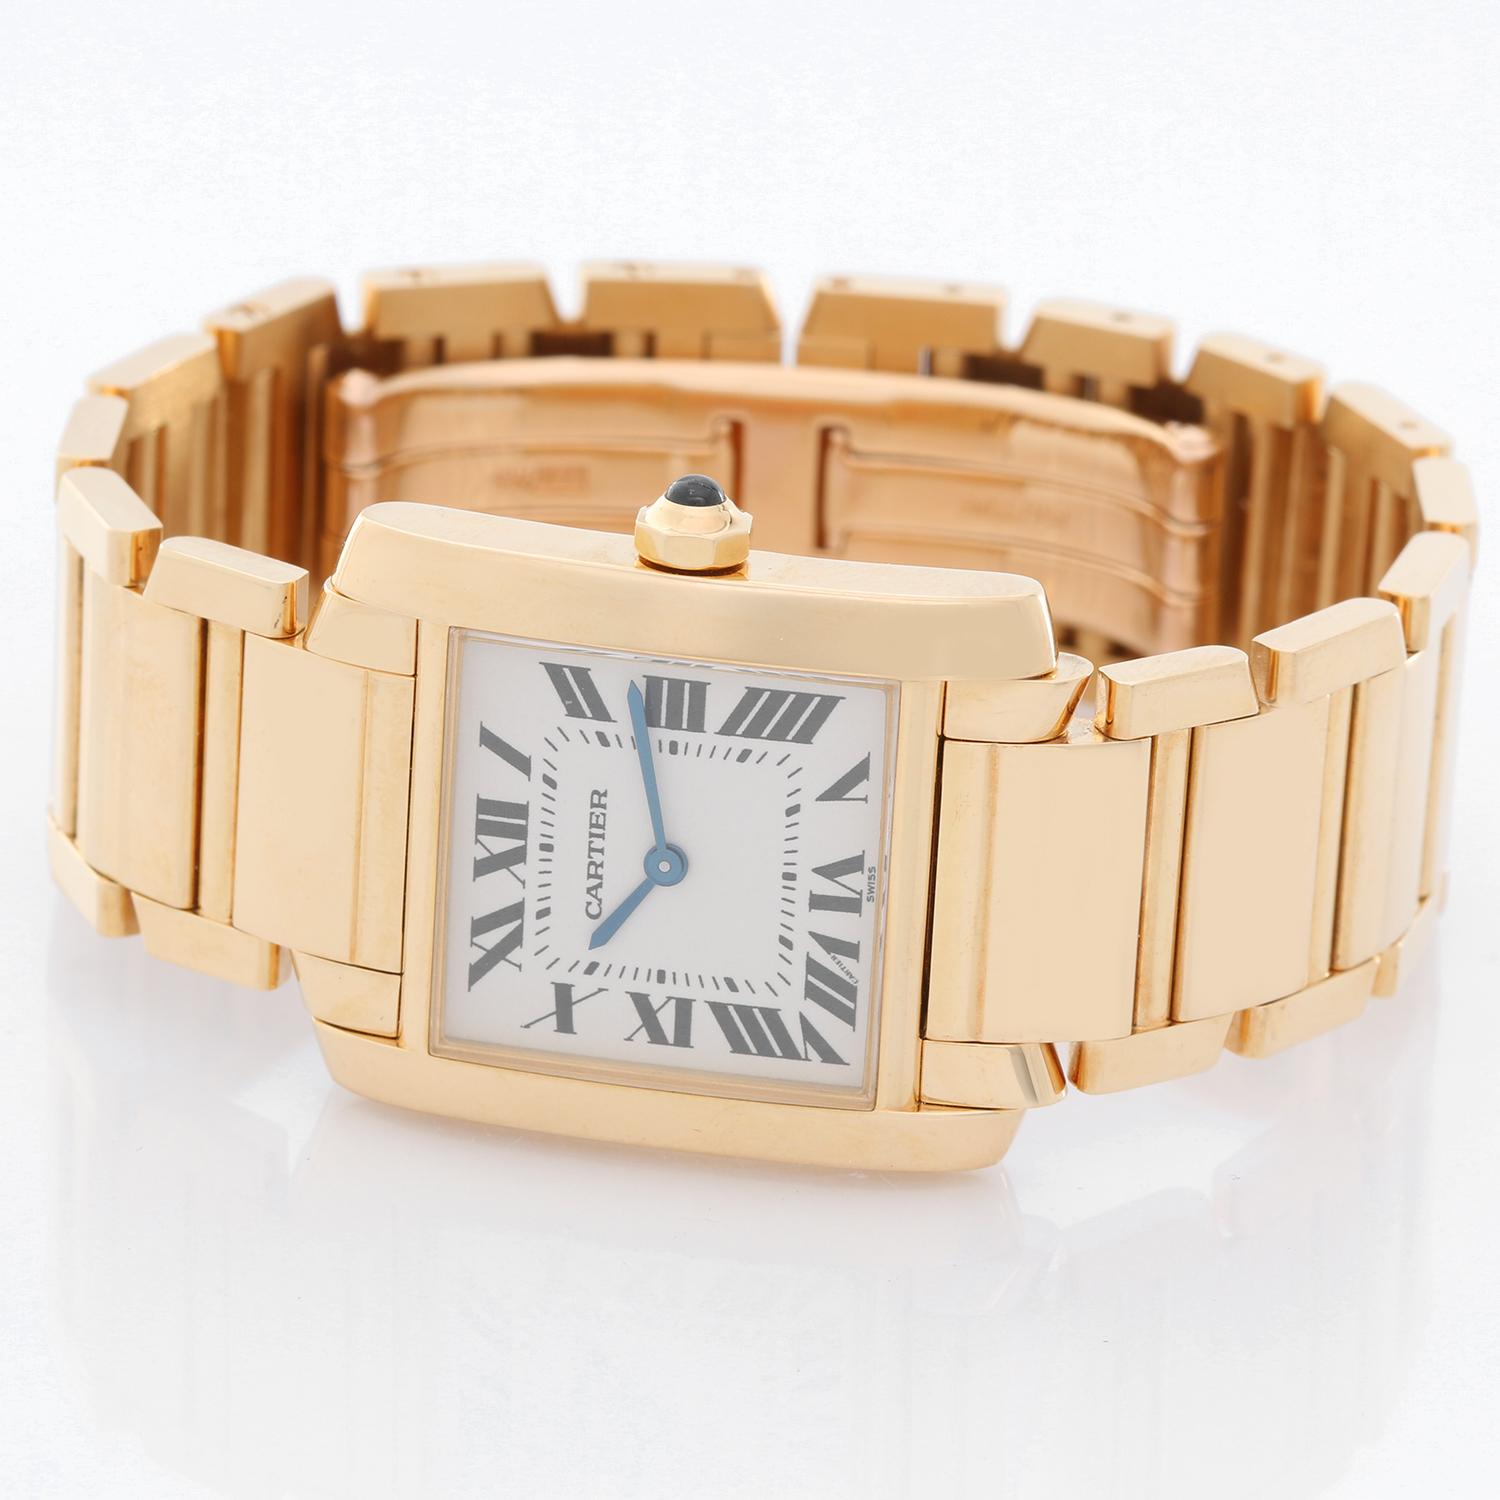 Cartier Tank Francaise Midsize 18k Yellow Gold Men's/Ladies Watch W50003N2 -  Quartz. 18k yellow gold  case; blue sapphire cabochon crown (25mm x 30mm). Ivory colored dial with black Roman numerals. Cartier 18k yellow gold bracelet. Pre-owned with